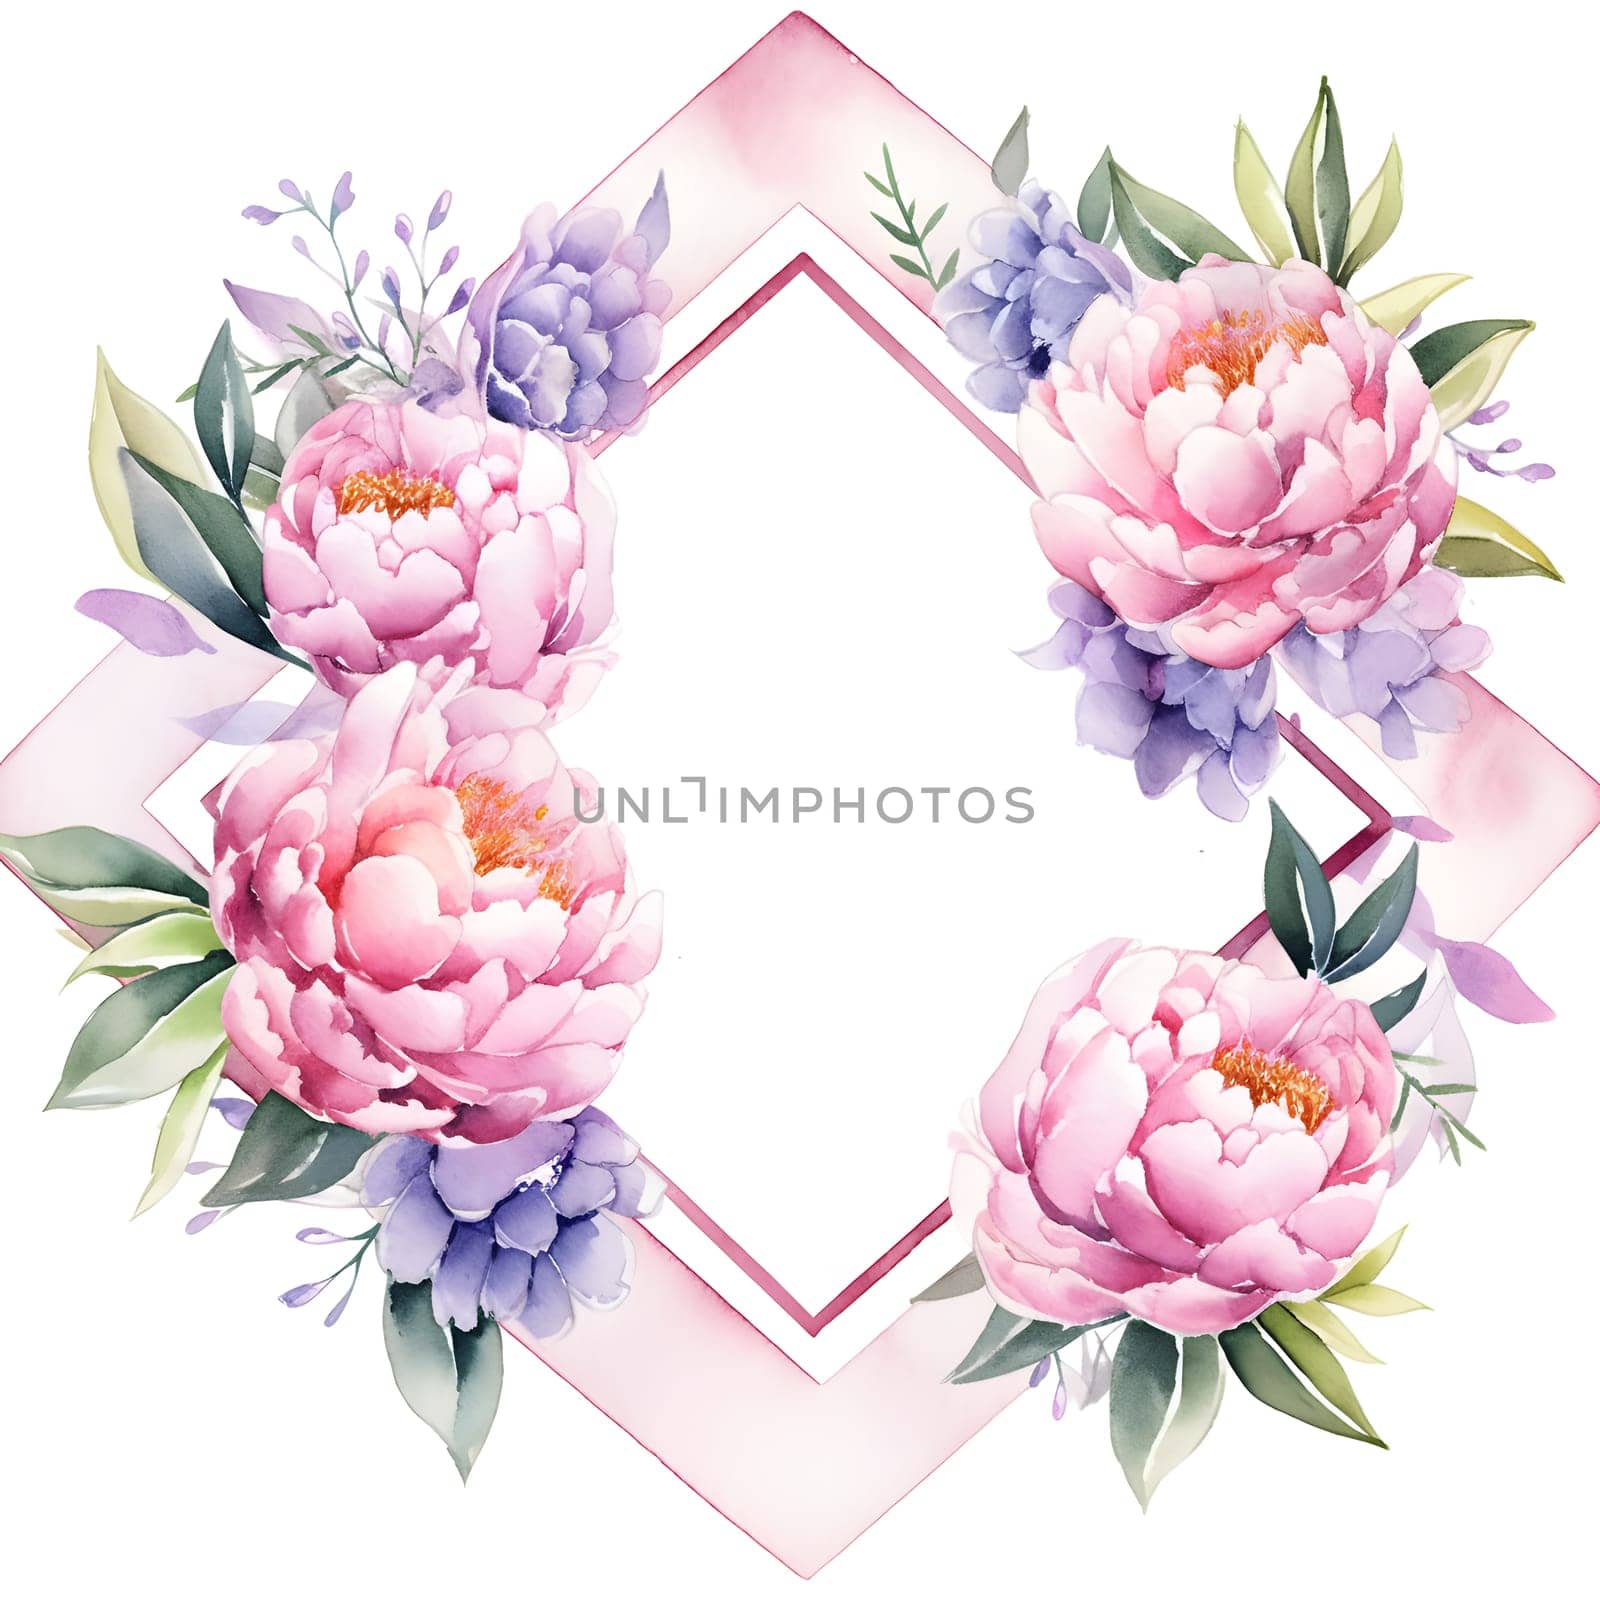 Creative arts frame with pink flowers and green leaves on a white background by Nadtochiy